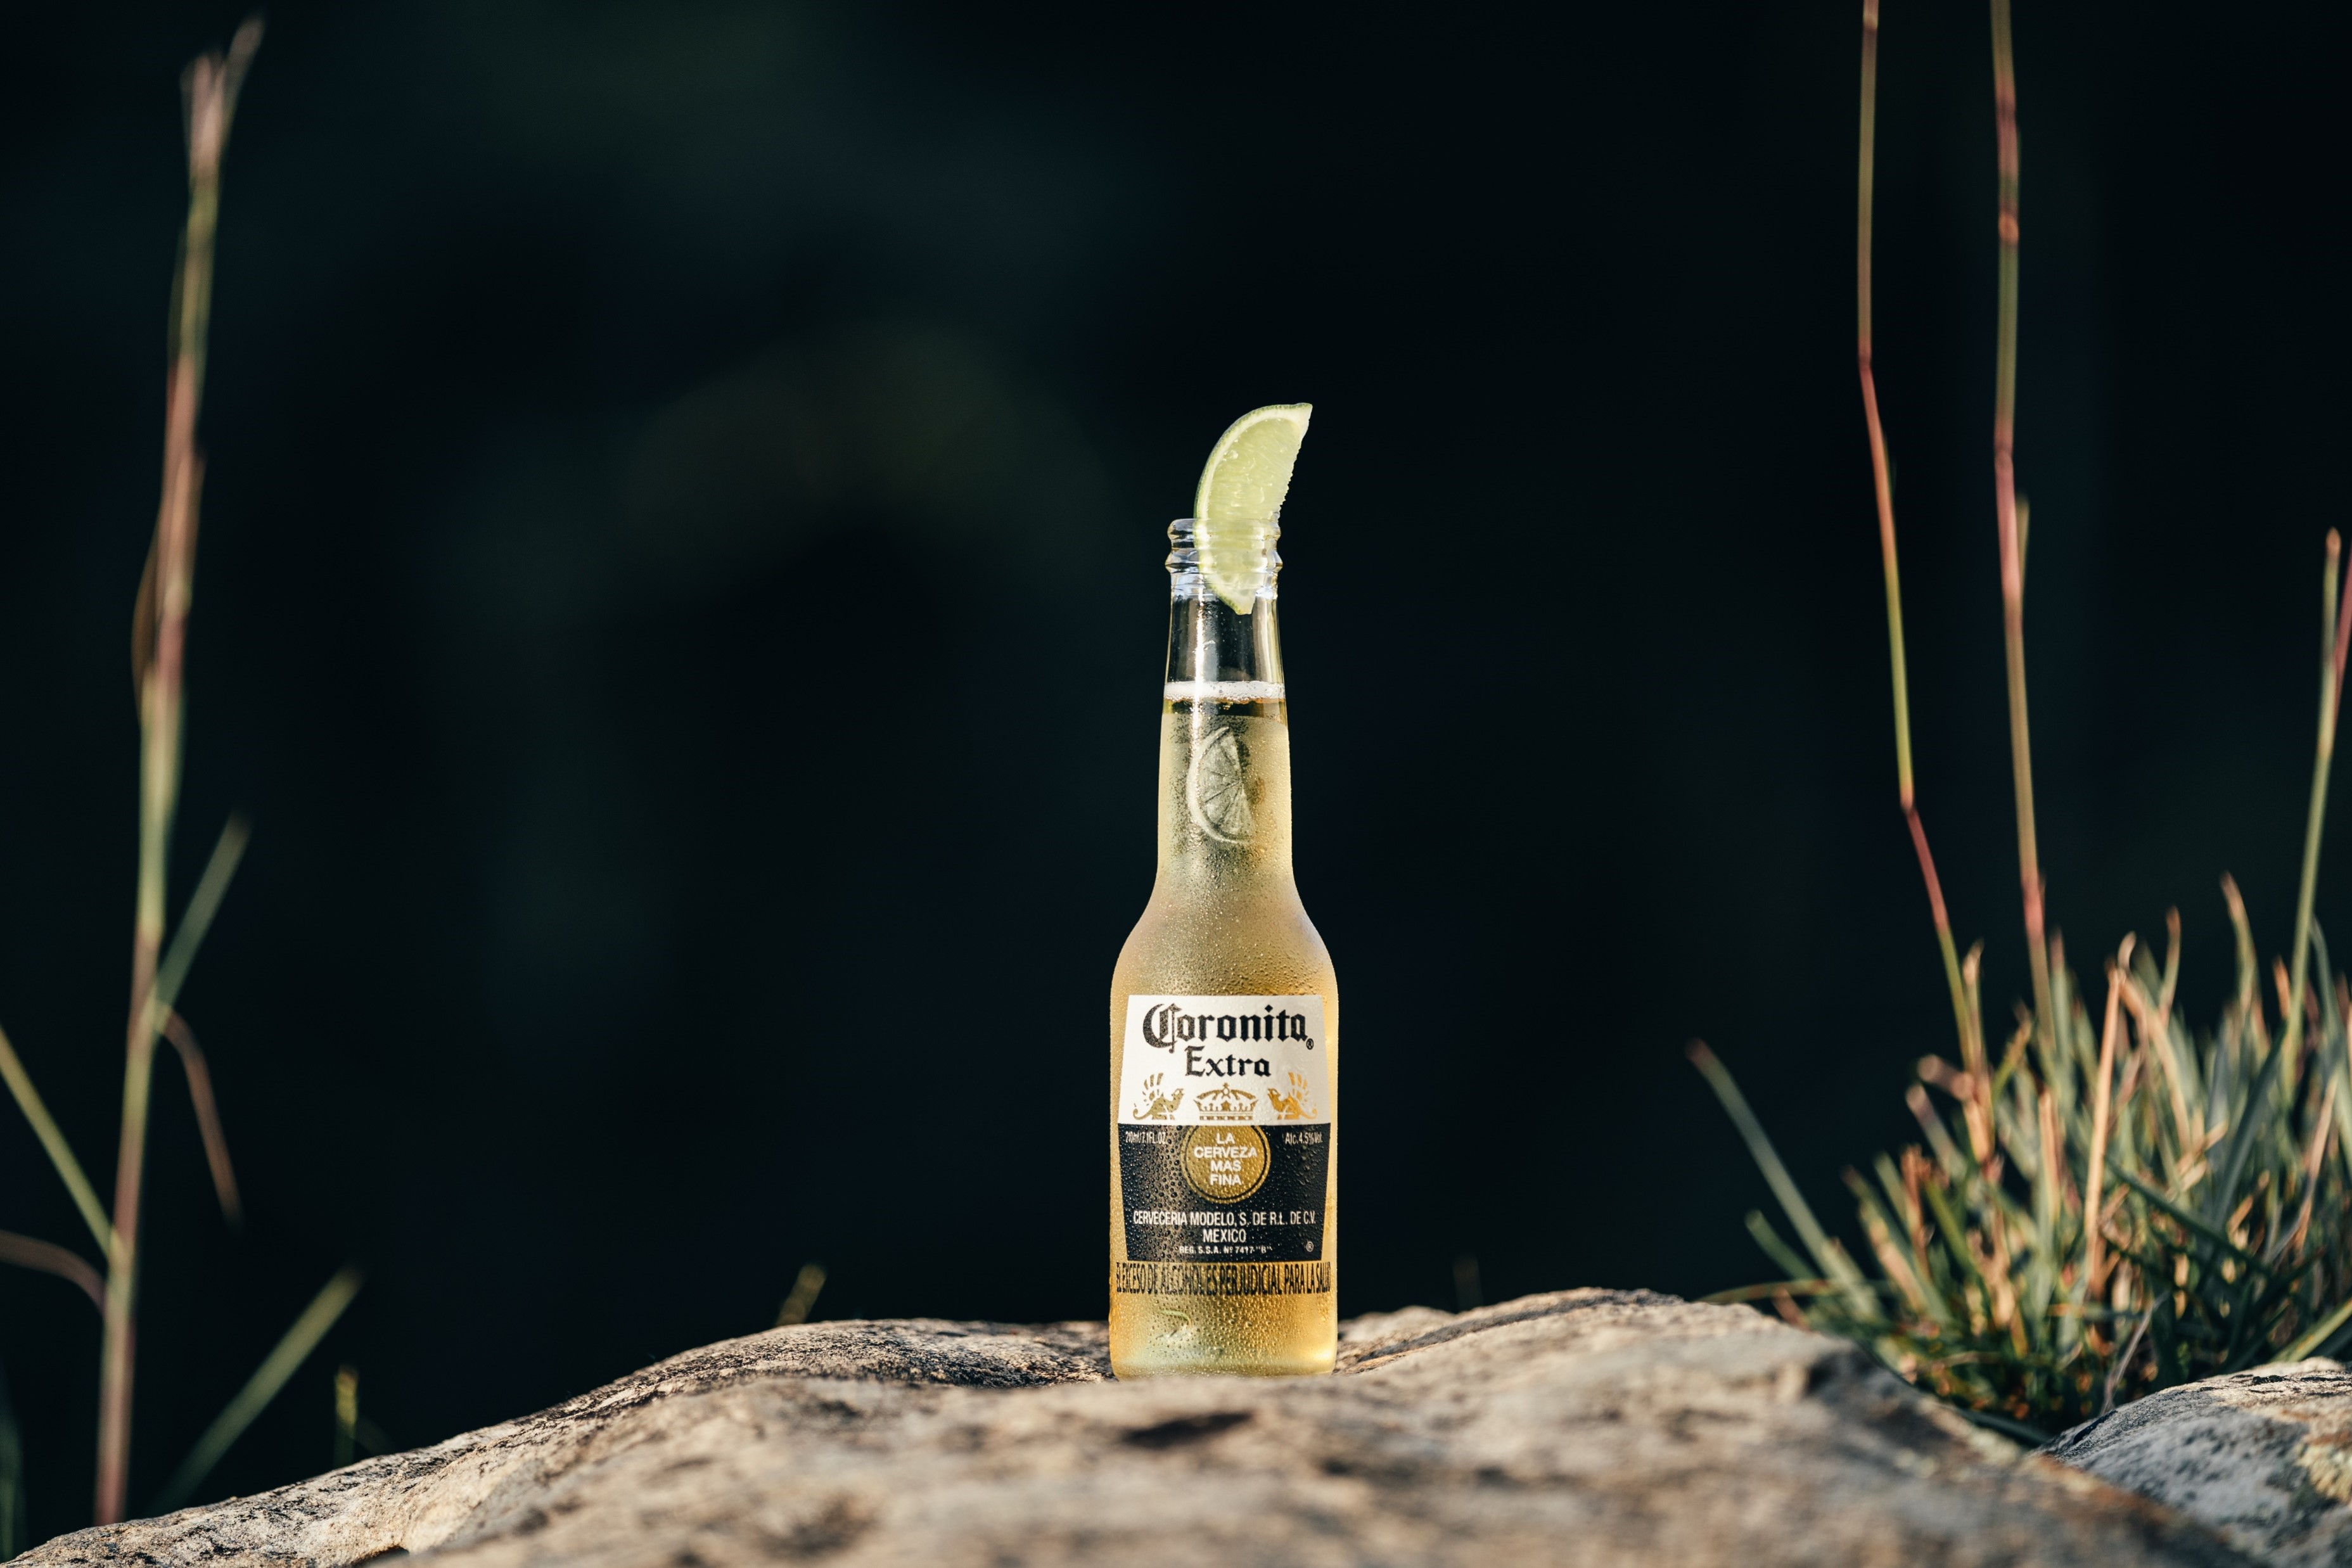 Lime Bottle Raises as a New Corona Icon With a Little Help From OniriaTBWA